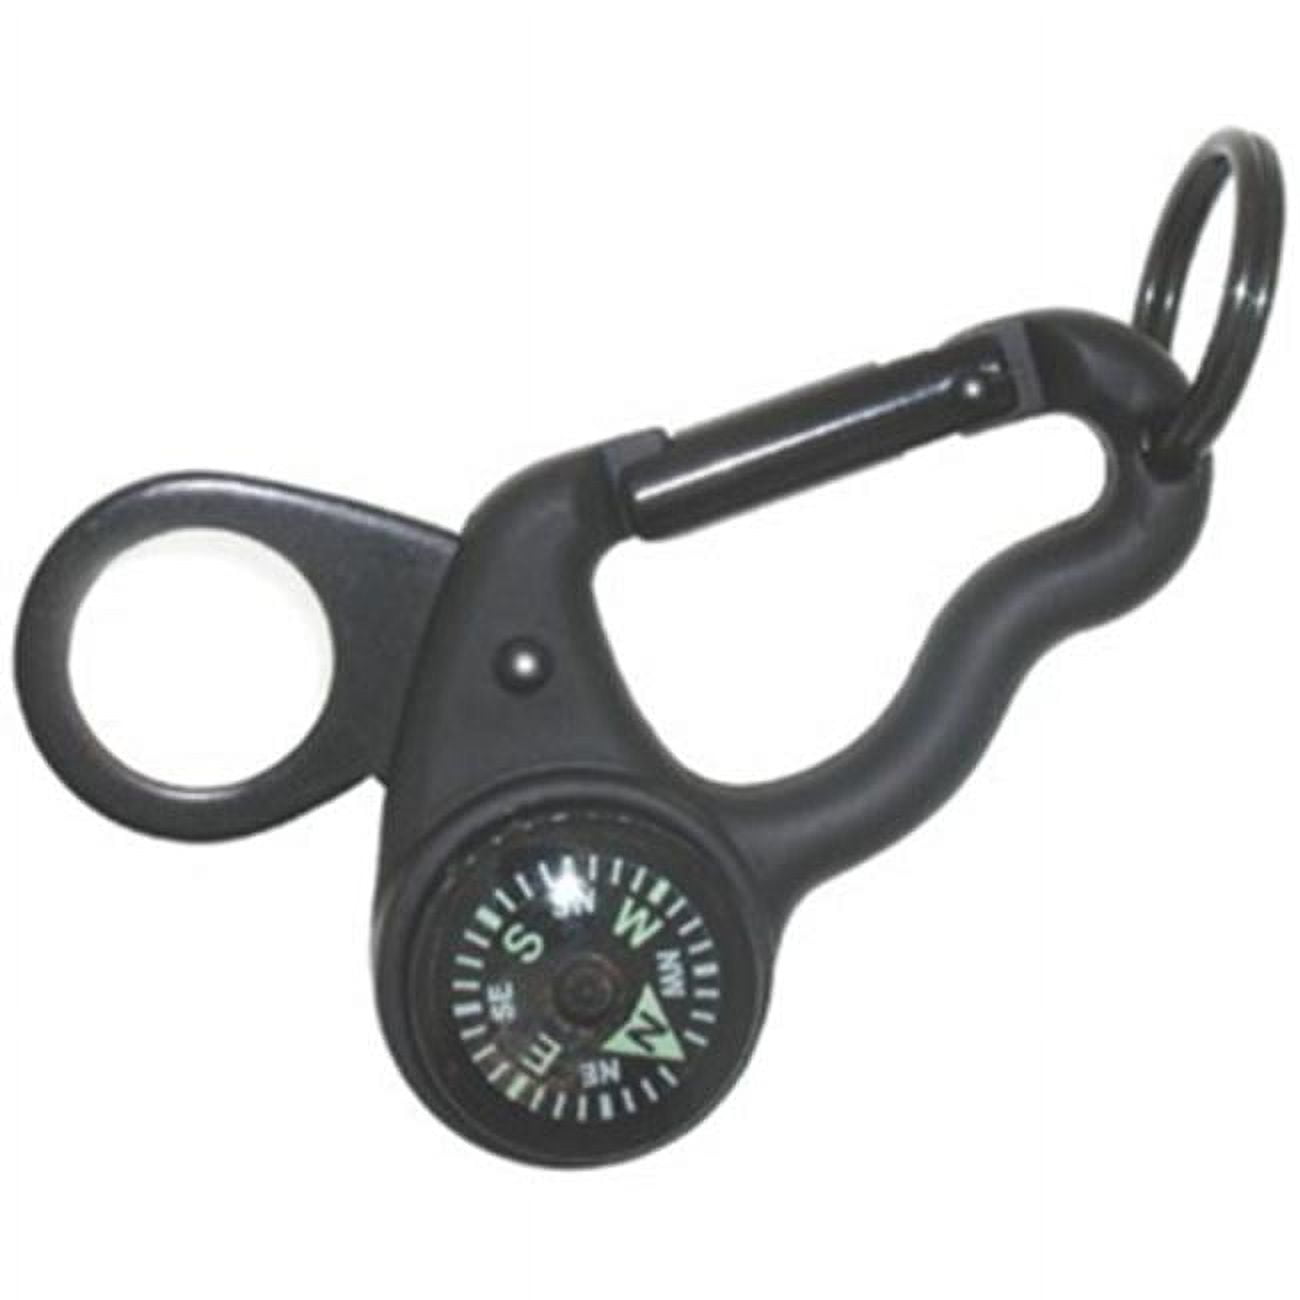 MagniComp - Compass/Magnifier Carabiner | Carabiner with Luminous ...